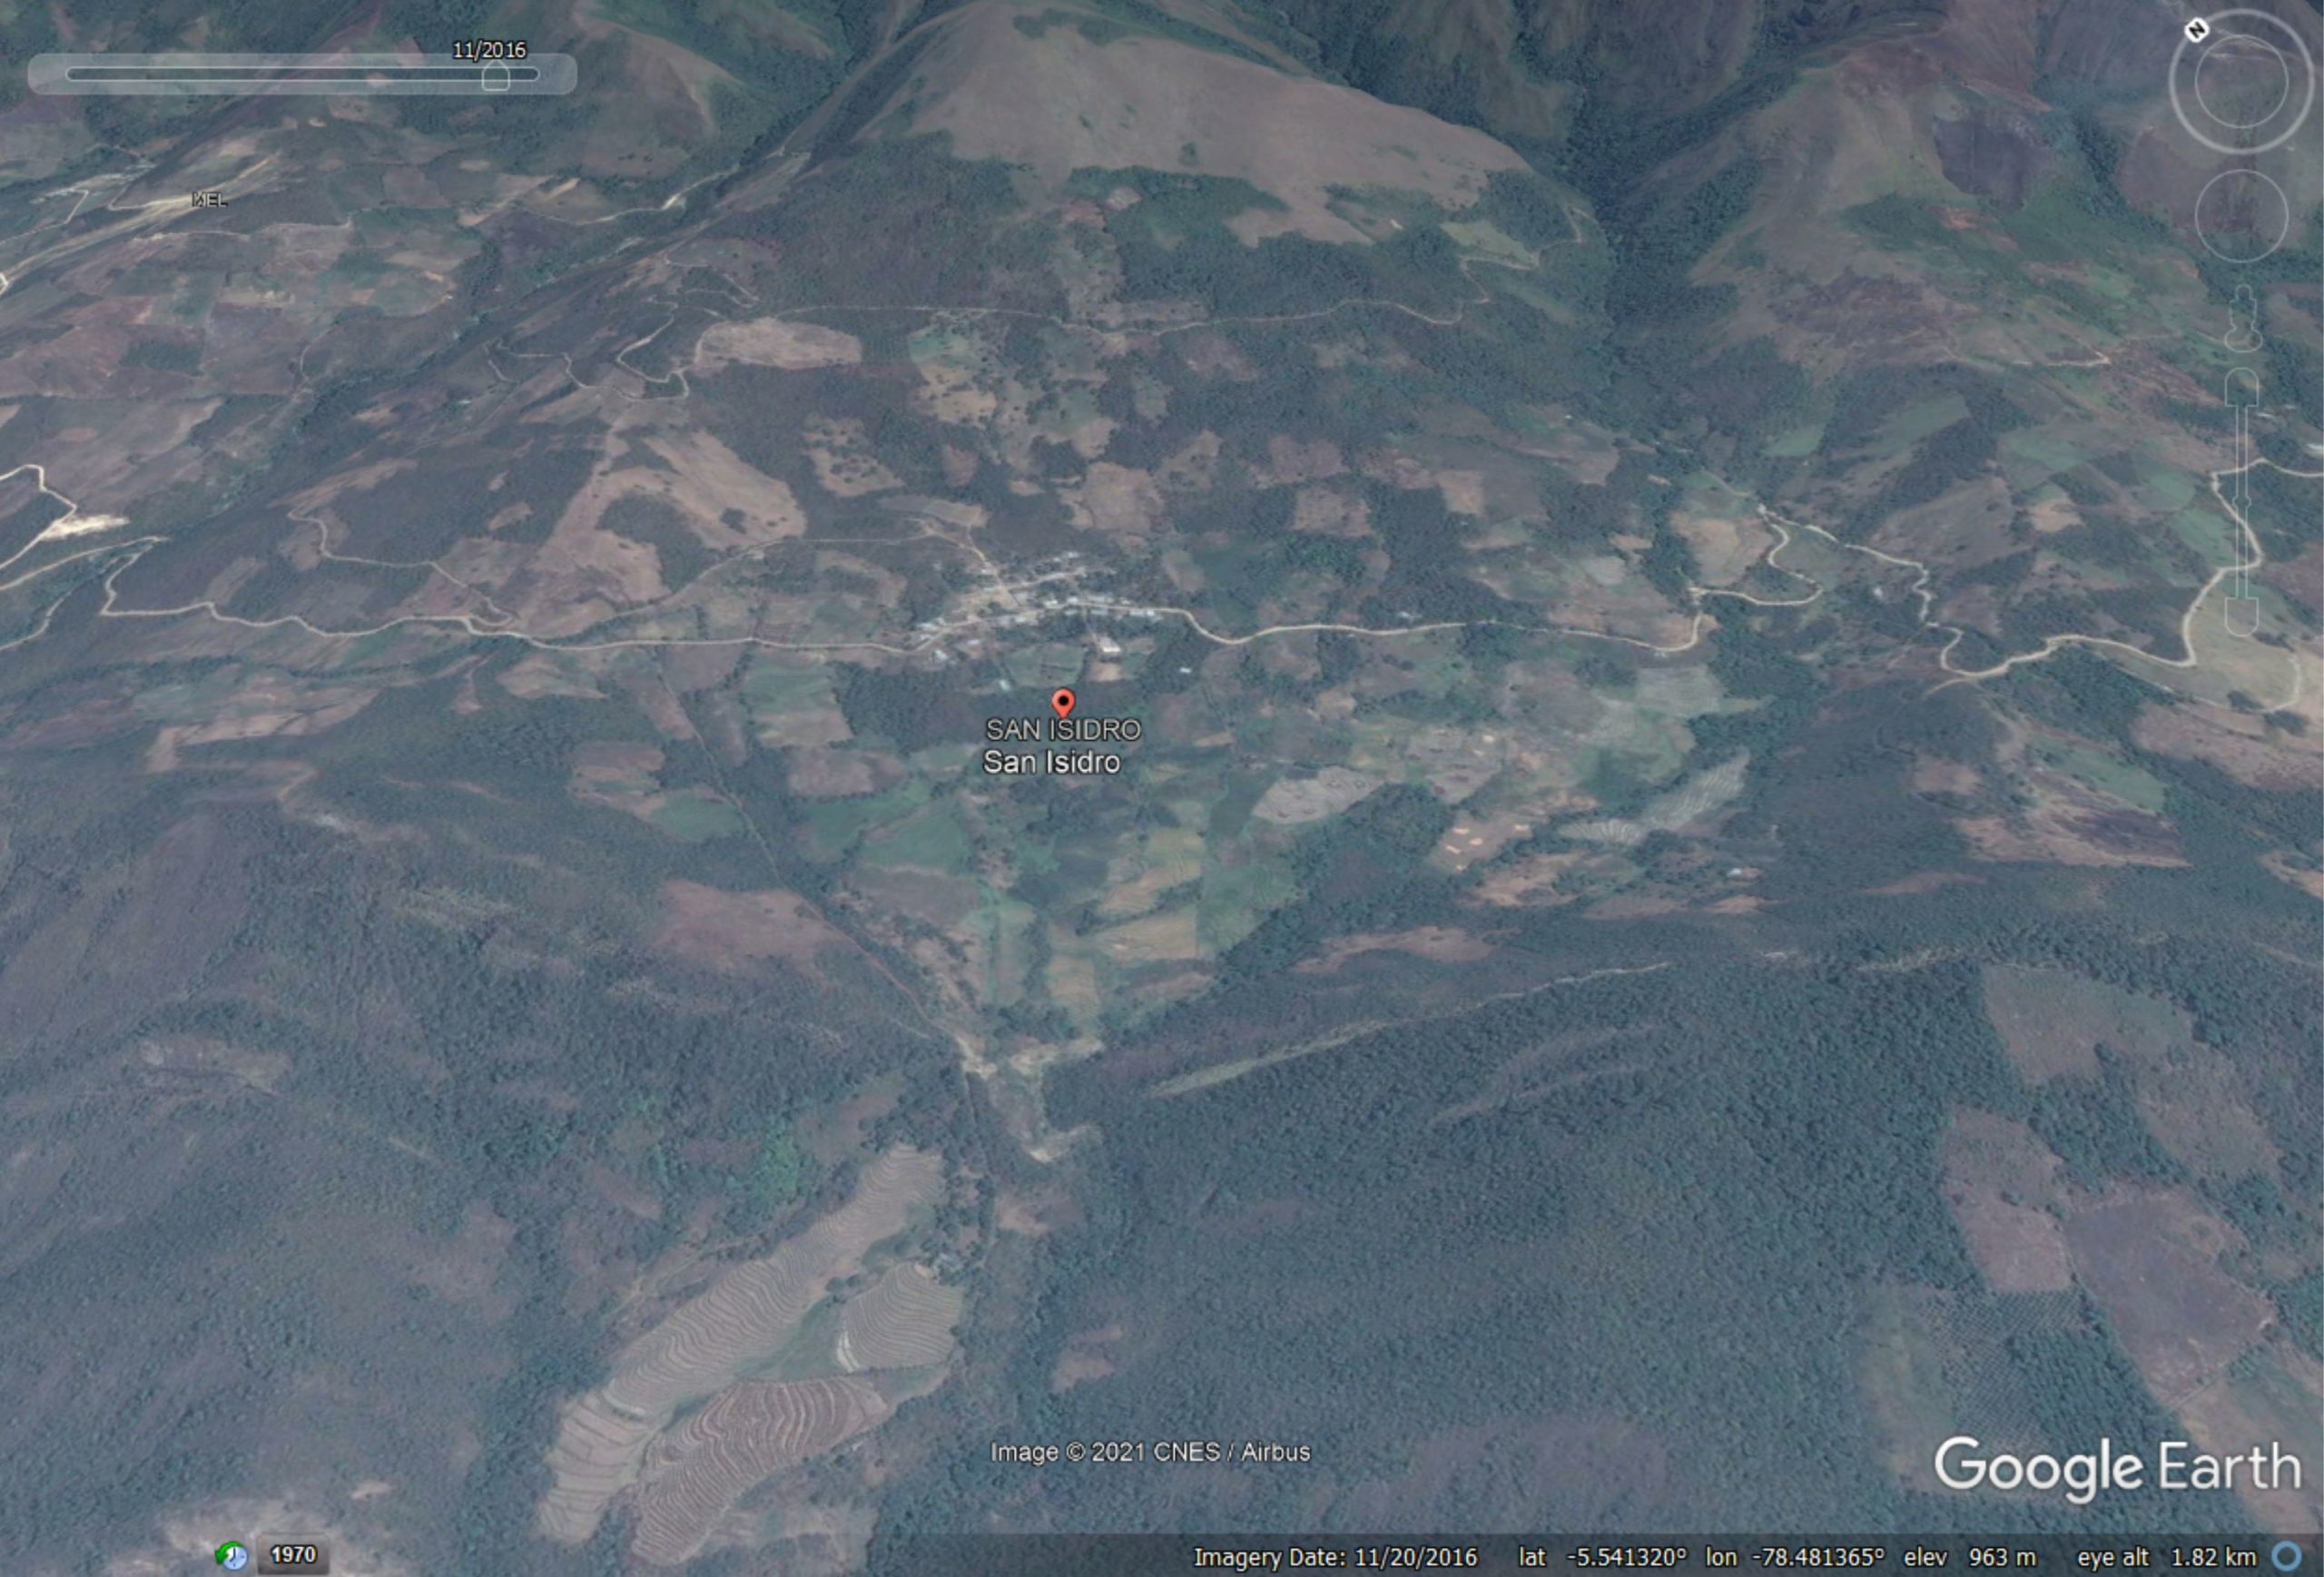 Google Earth image of the possible location of the landslide at San Isidro in Peru.